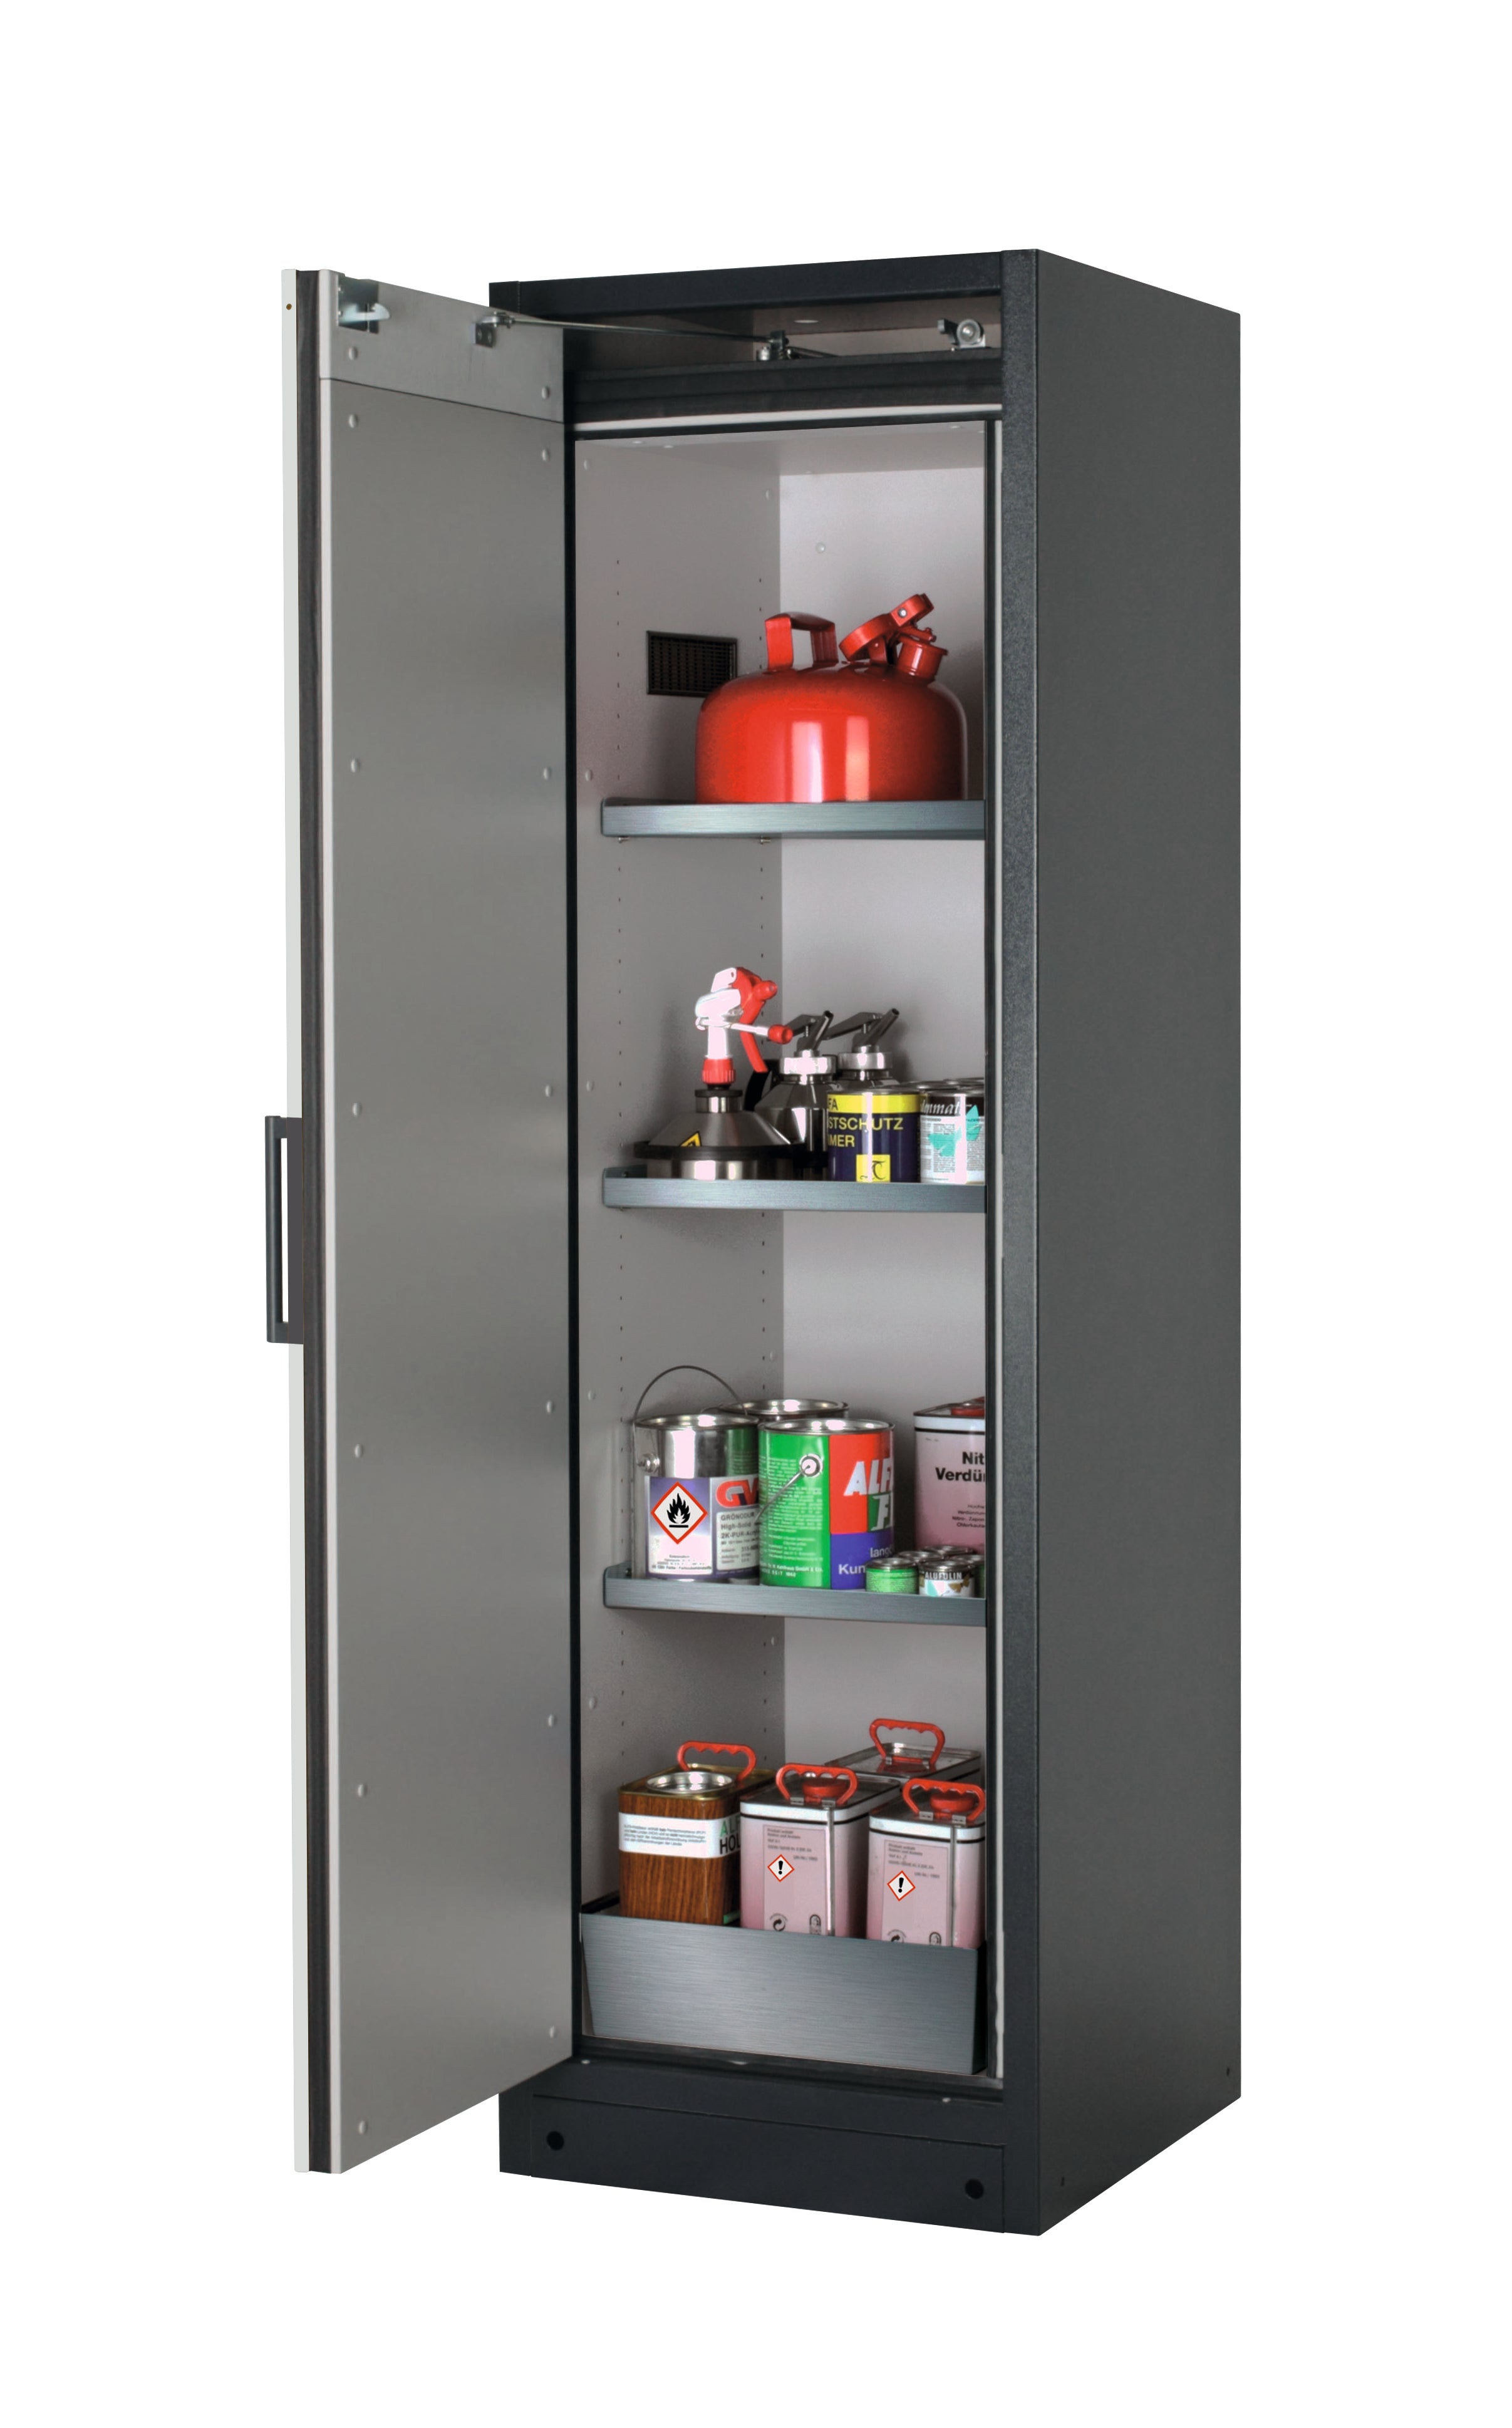 Type 90 safety storage cabinet Q-PEGASUS-90 model Q90.195.060.WDAC in light grey RAL 7035 with 3x shelf standard (stainless steel 1.4301),